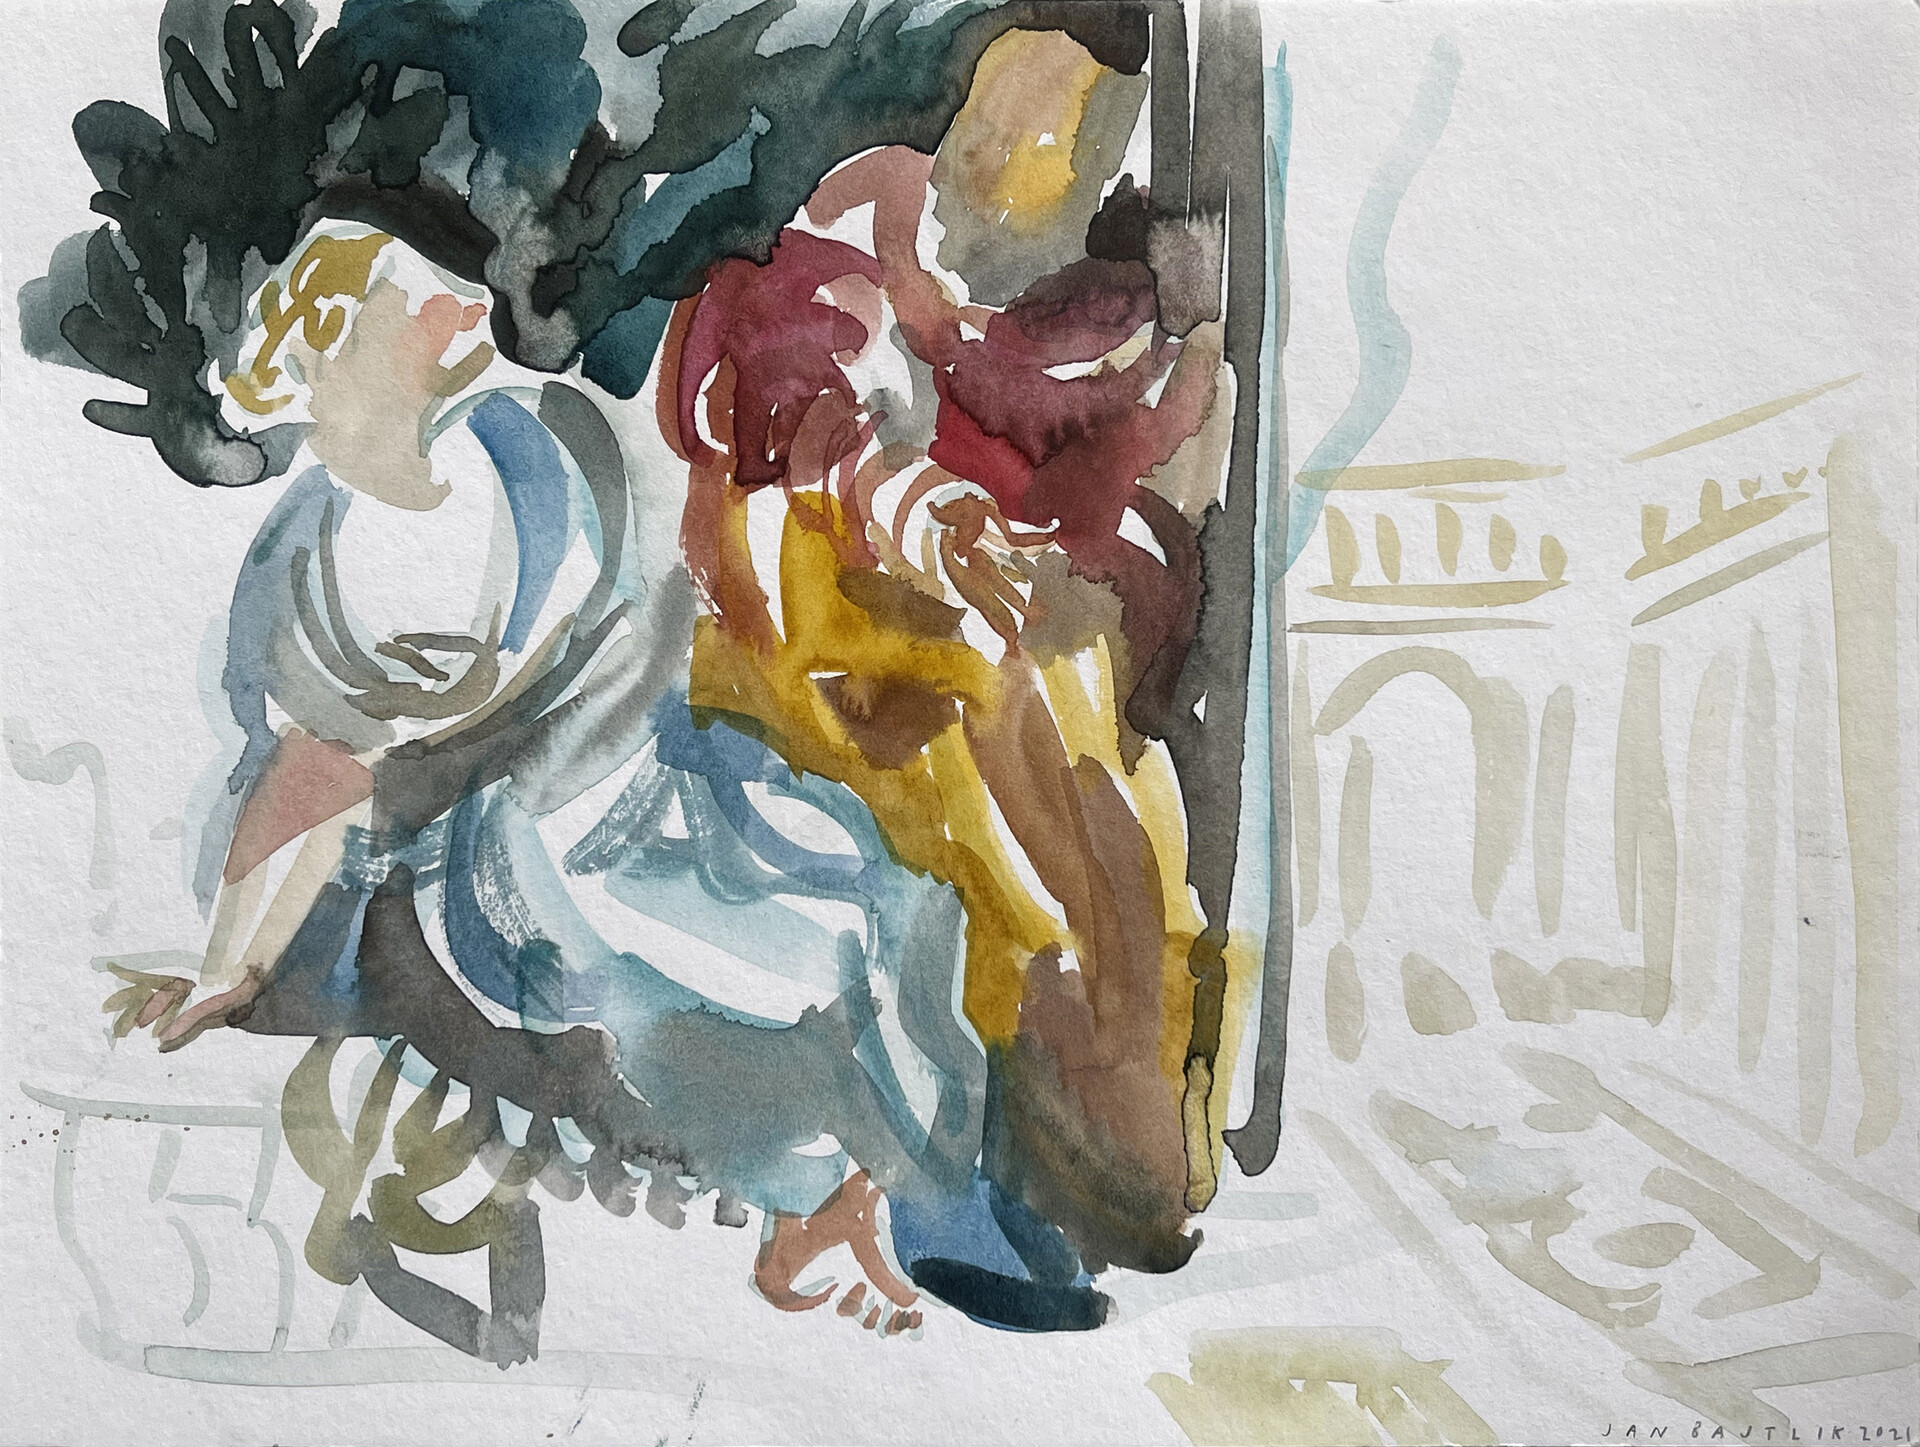 “Bathsheba at her Bath” inspired by Paolo Veronese “Bathsheba at her Bath” (1575), 29,7 x 21 cm, watercolour on paper, 2021.